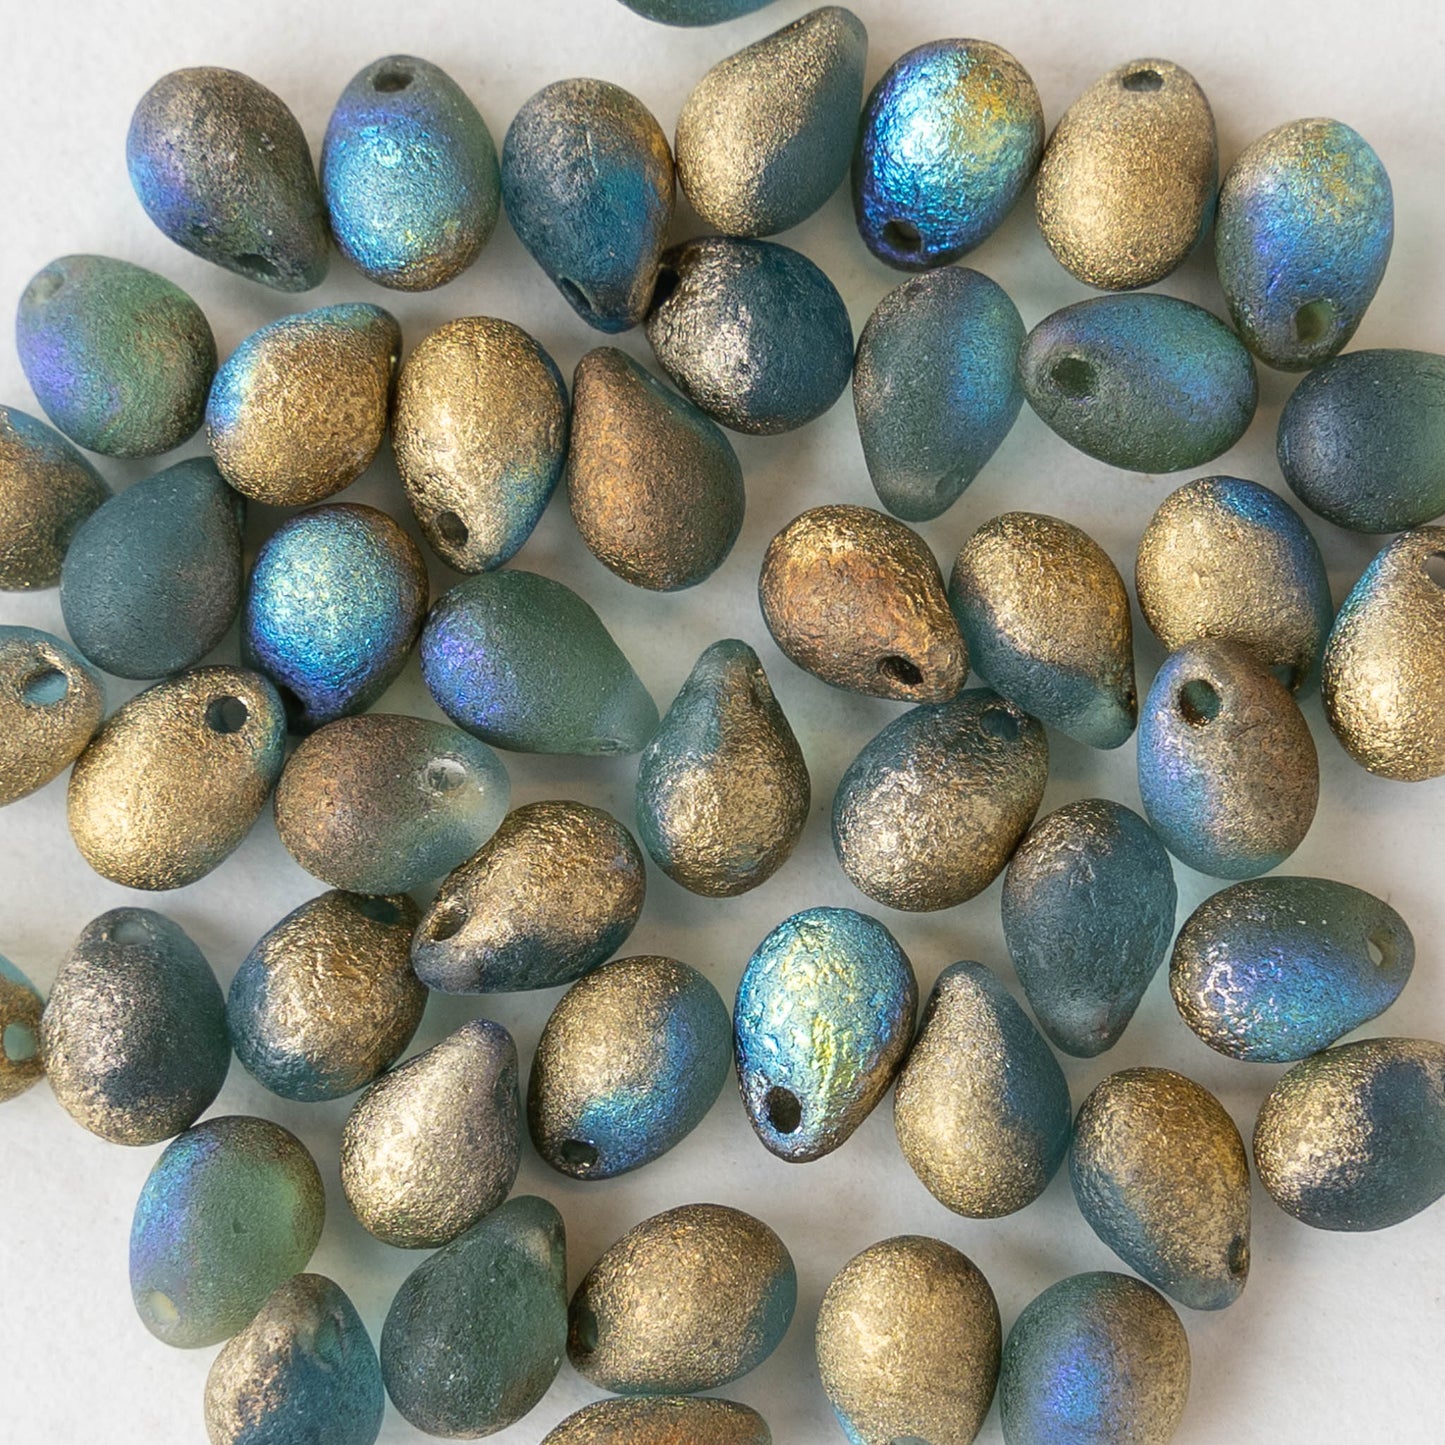 5x7mm Glass Teardrop Beads - Sky Blue and Gold Etched - 50 Beads